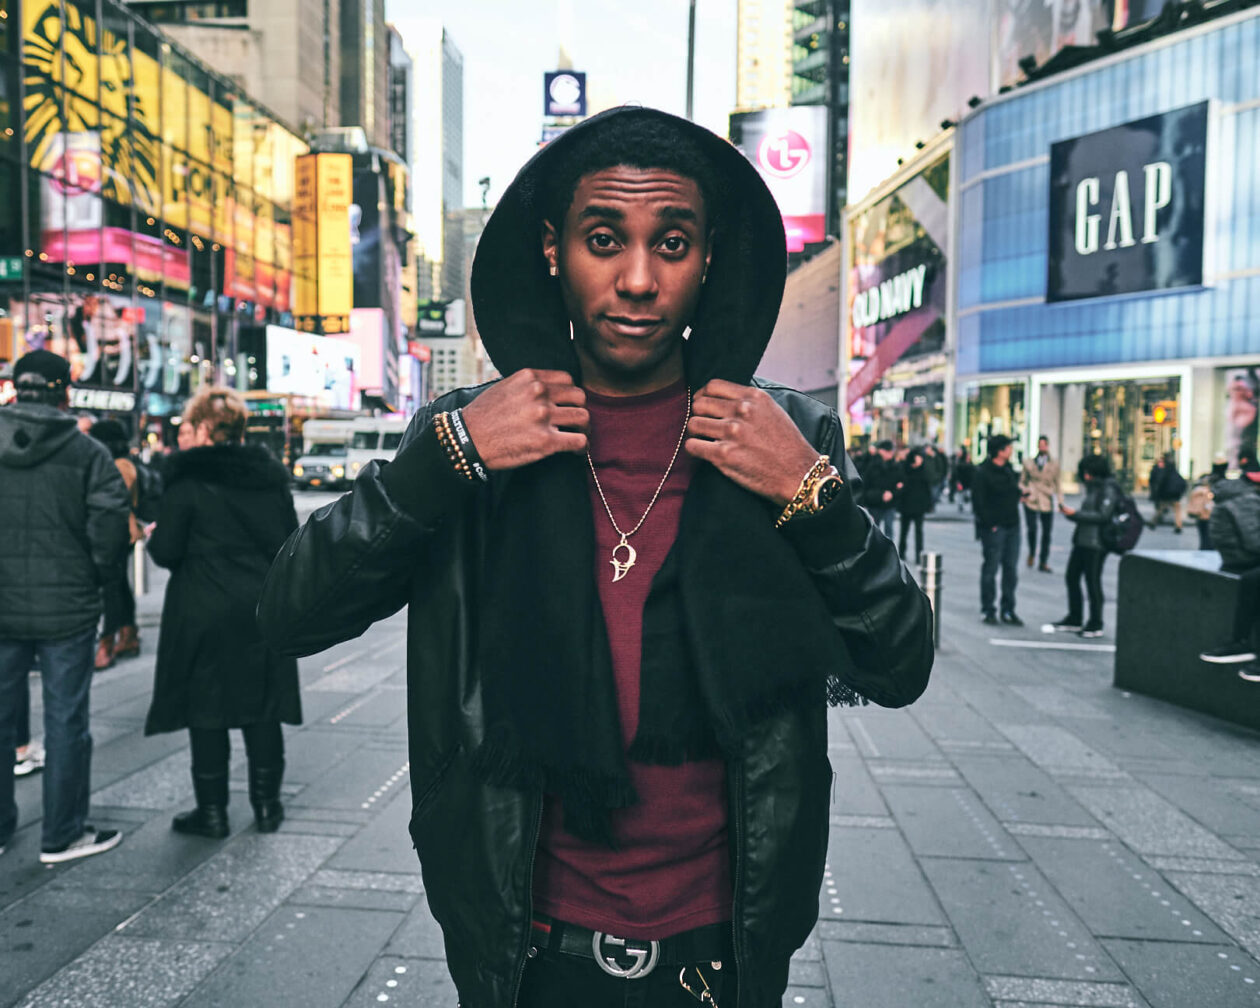 Fuji X Pro2 with xf 16mm f1.4 - Fashion lifestyle photography around New York City Time Square - Model: Bryan